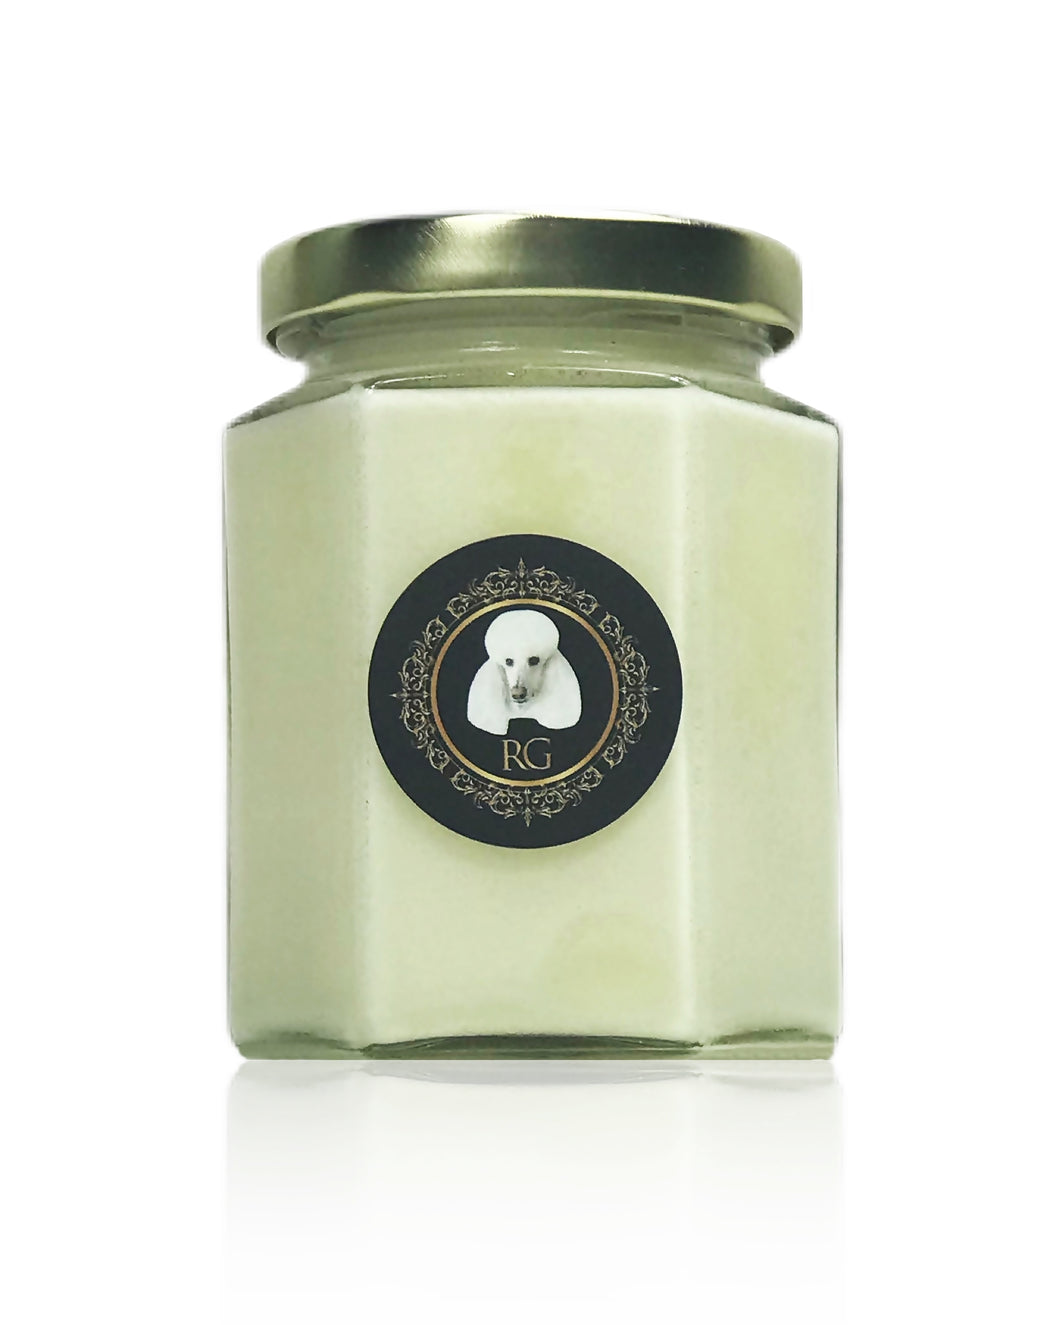 Country Herb Garden - Rosemary & Sage Hex Scented Candle